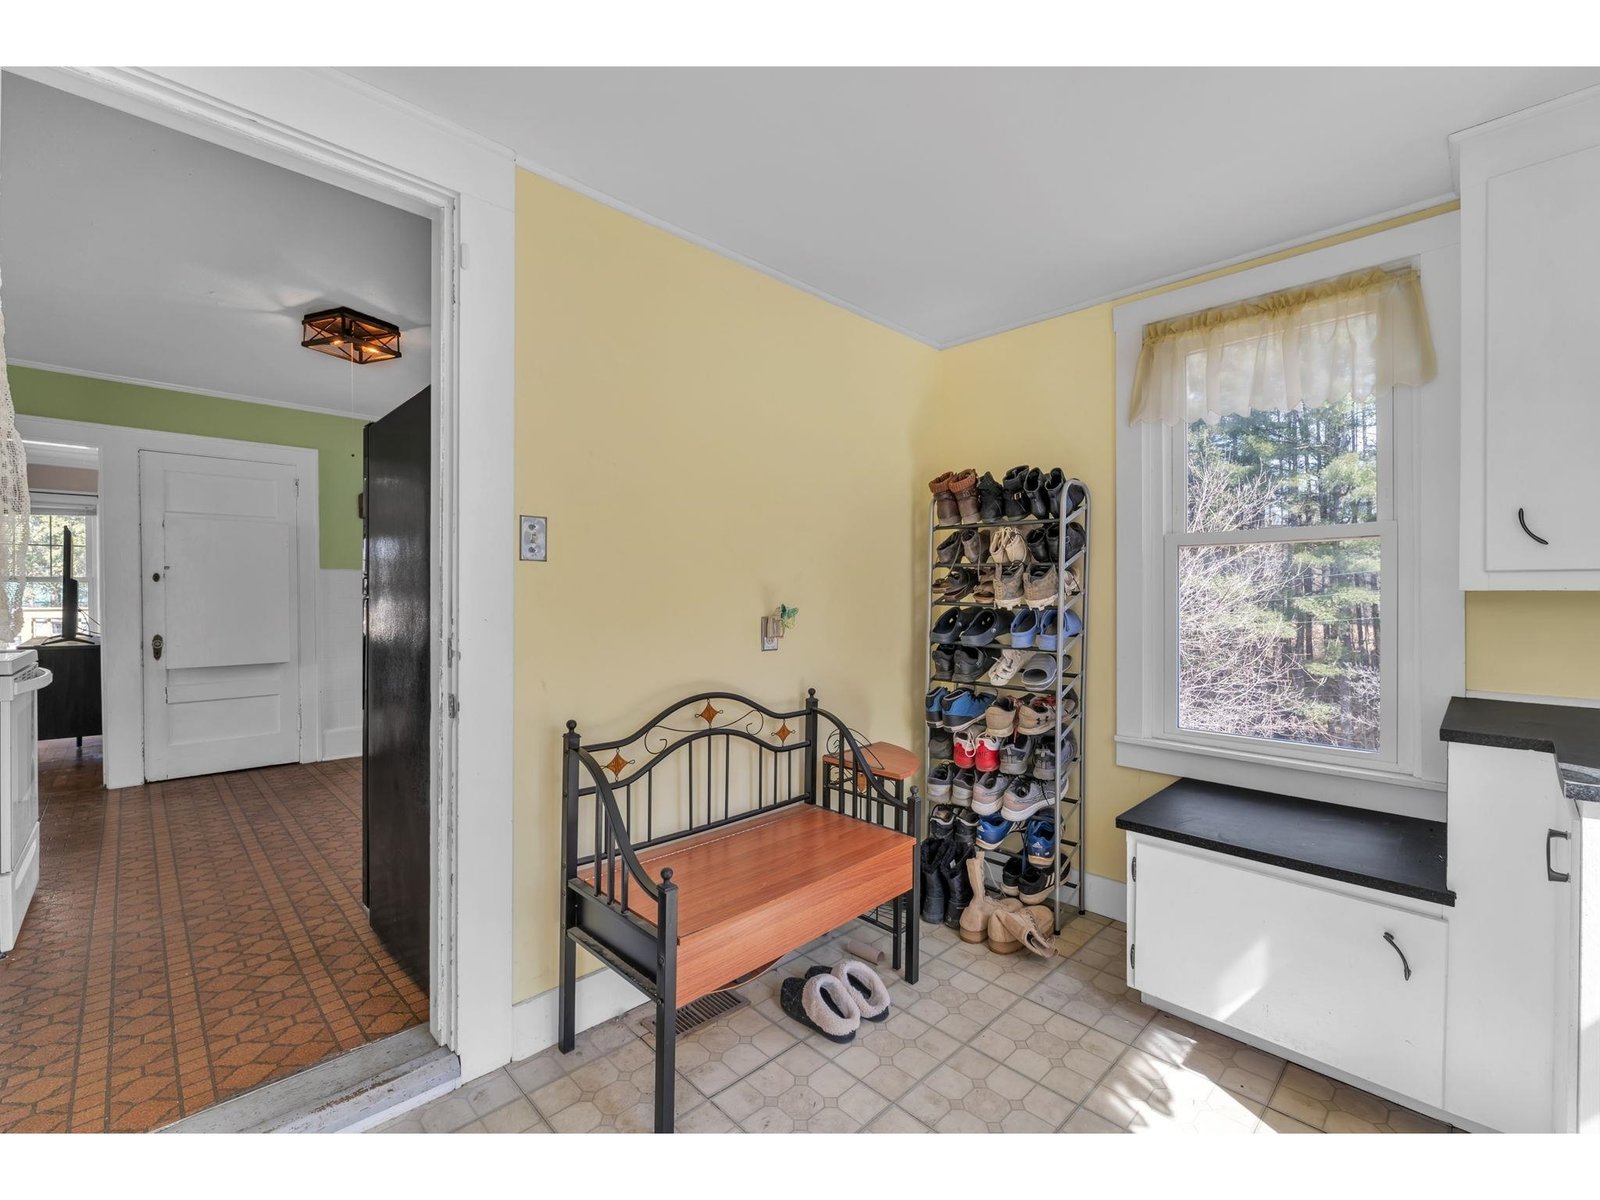 Oversized mudroom/enclosed porch with enough space for all your needs